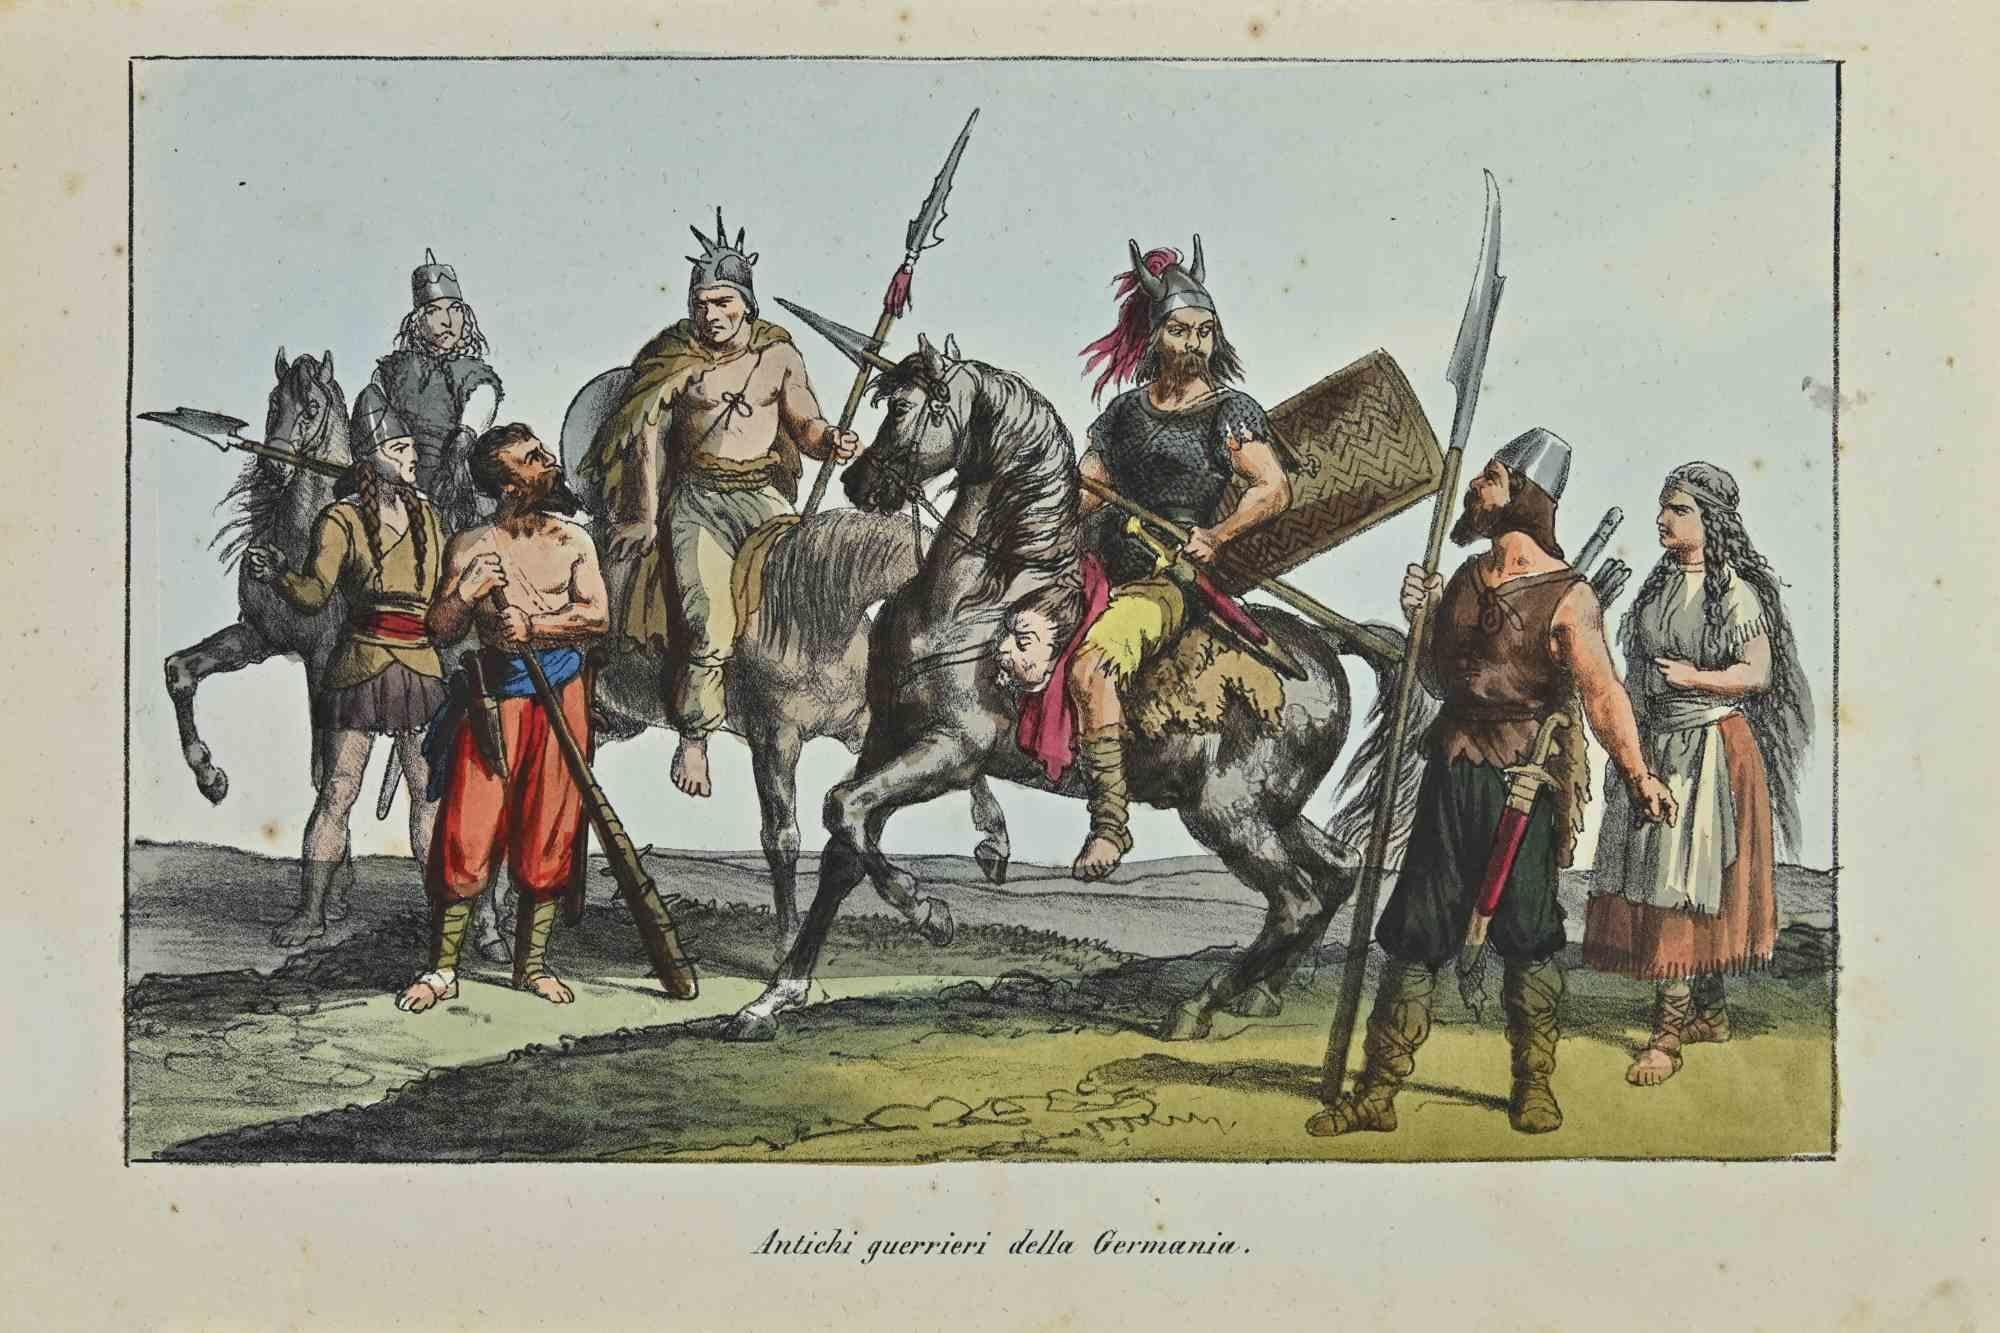 Ancient Warriors of Germany is a lithograph made by Auguste Wahlen in 1844.

Hand colored.

Good condition.

At the center of the artwork is the original title "Ancient Warriors of Germany".

The work is part of Suite Moeurs, usages et costumes de